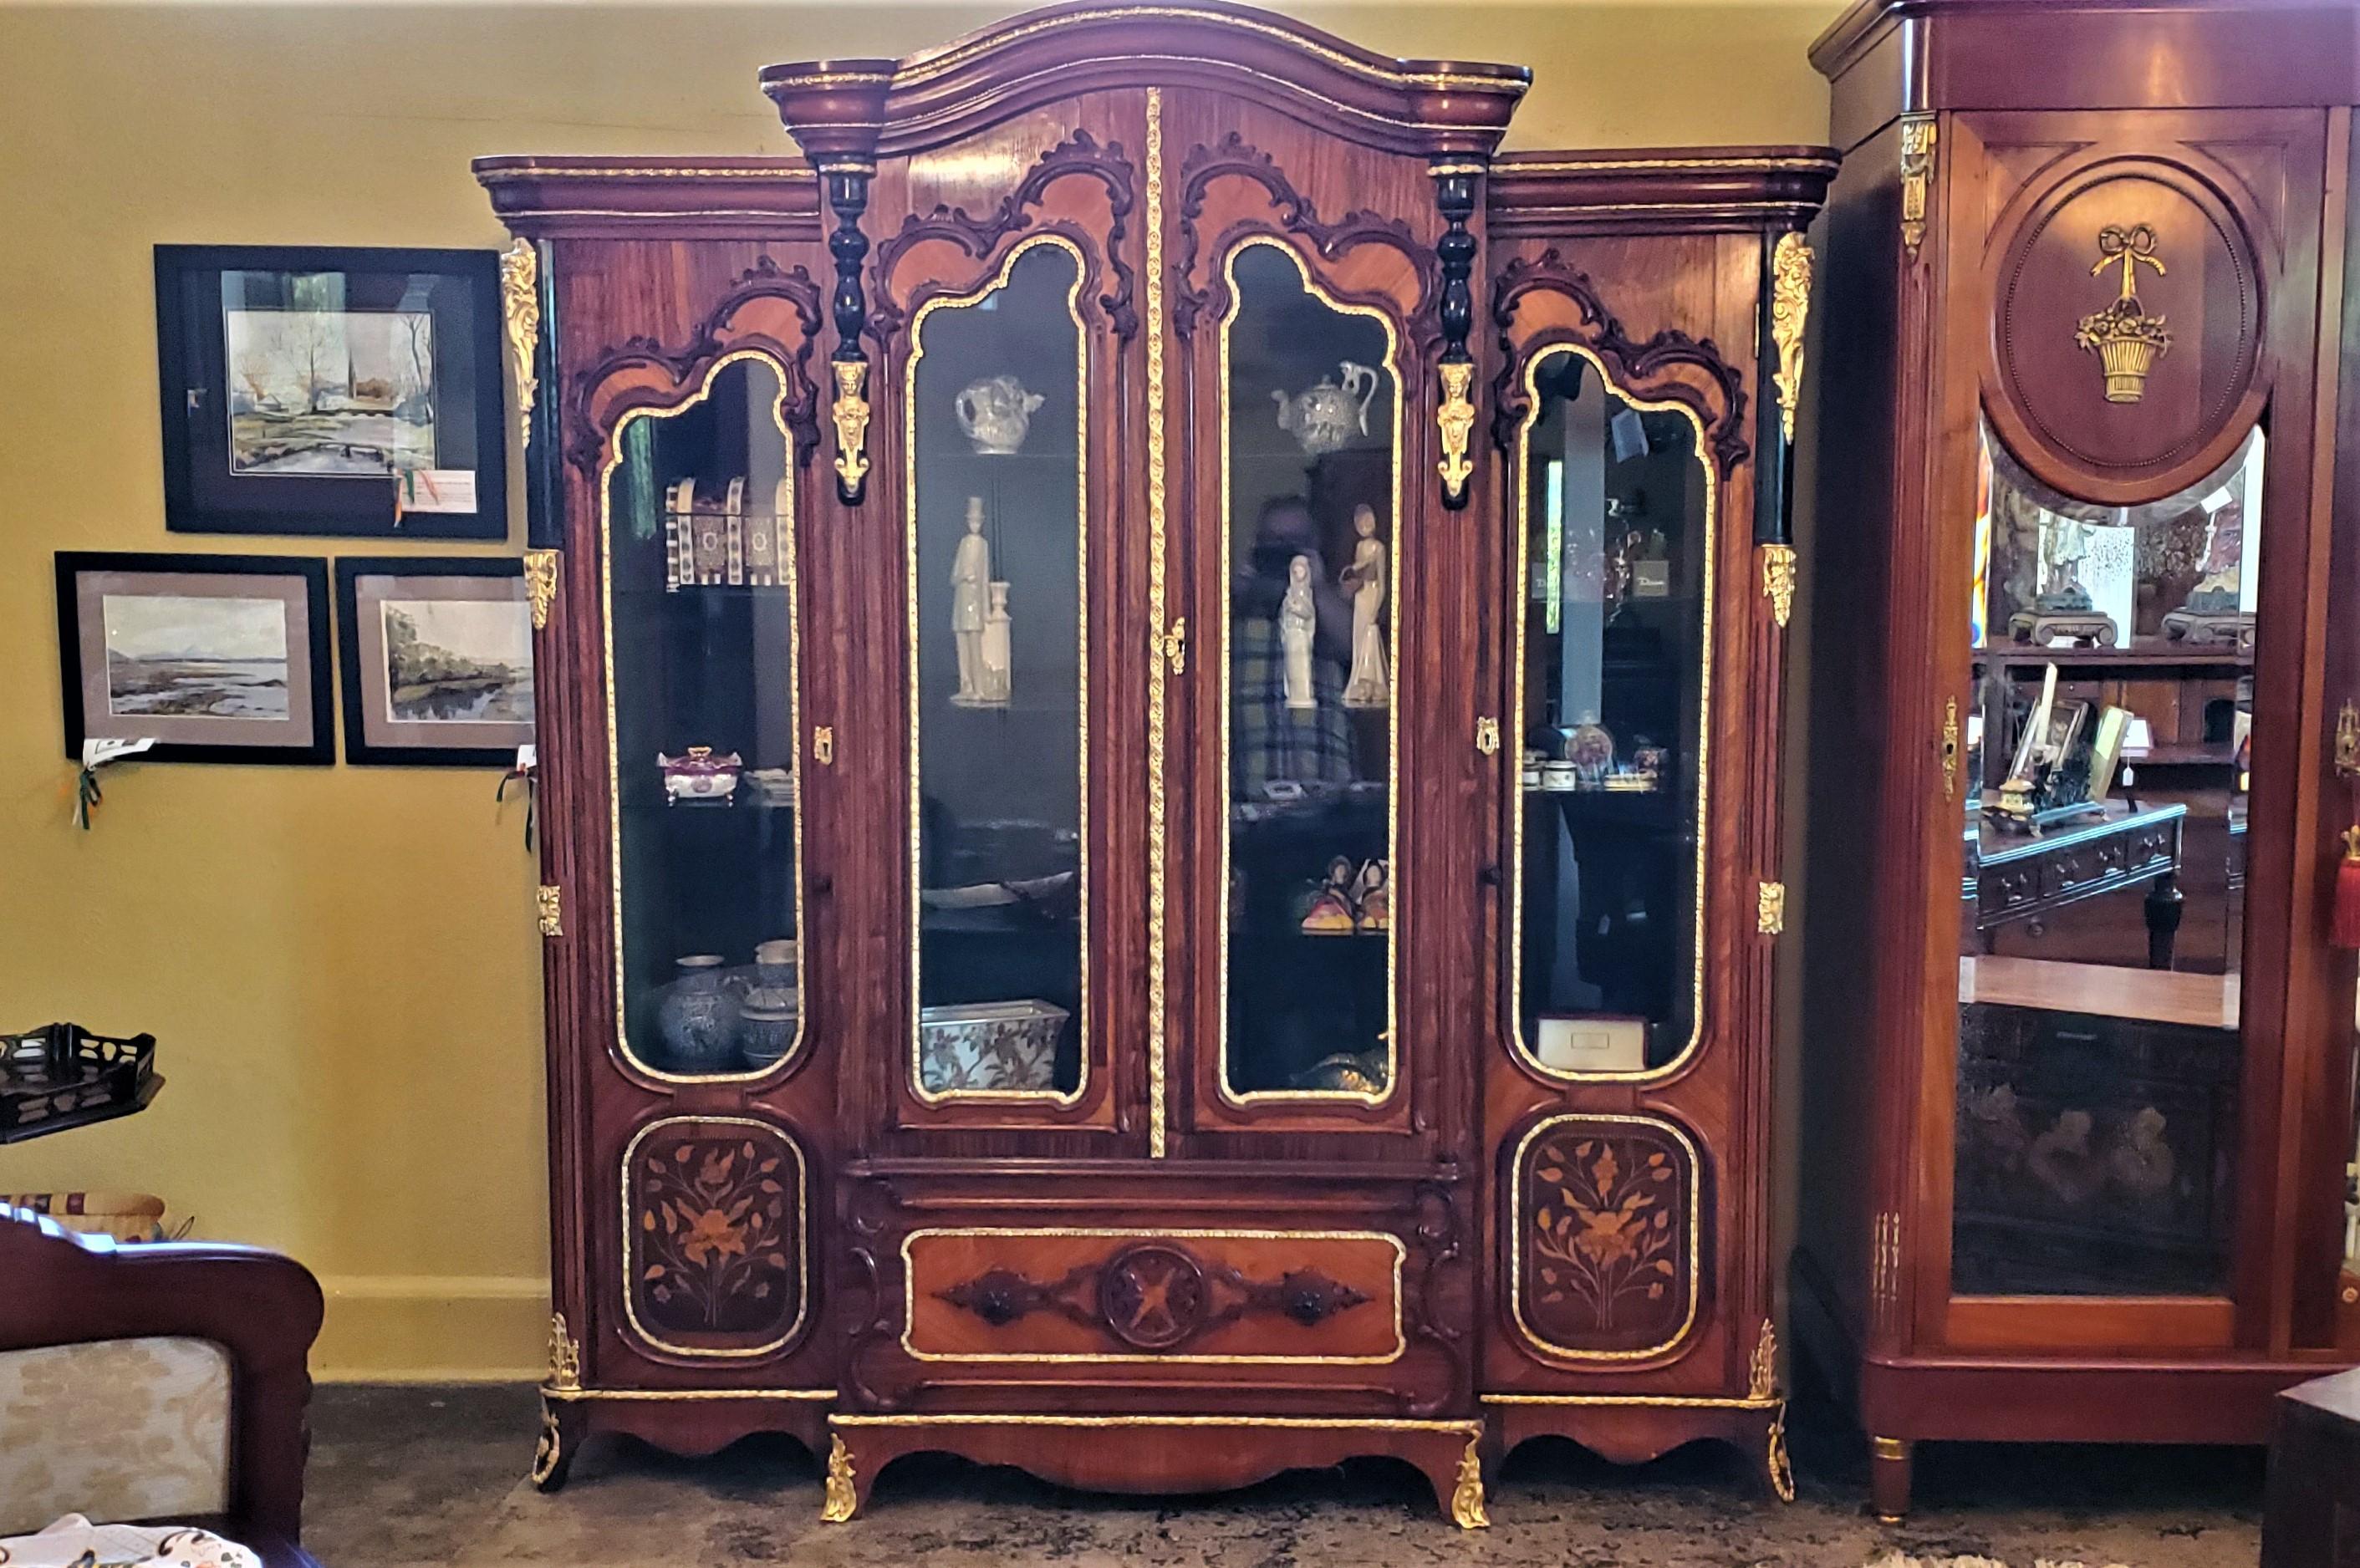 Stunning 19th century French Empire, neoclassical/Rococo Revival style Marquetry vitrine or display cabinet, of large proportions!!

A real statement piece!
Made of a fabulous variety of veneers, including kingwood, satinwood, tulipwood, harewood